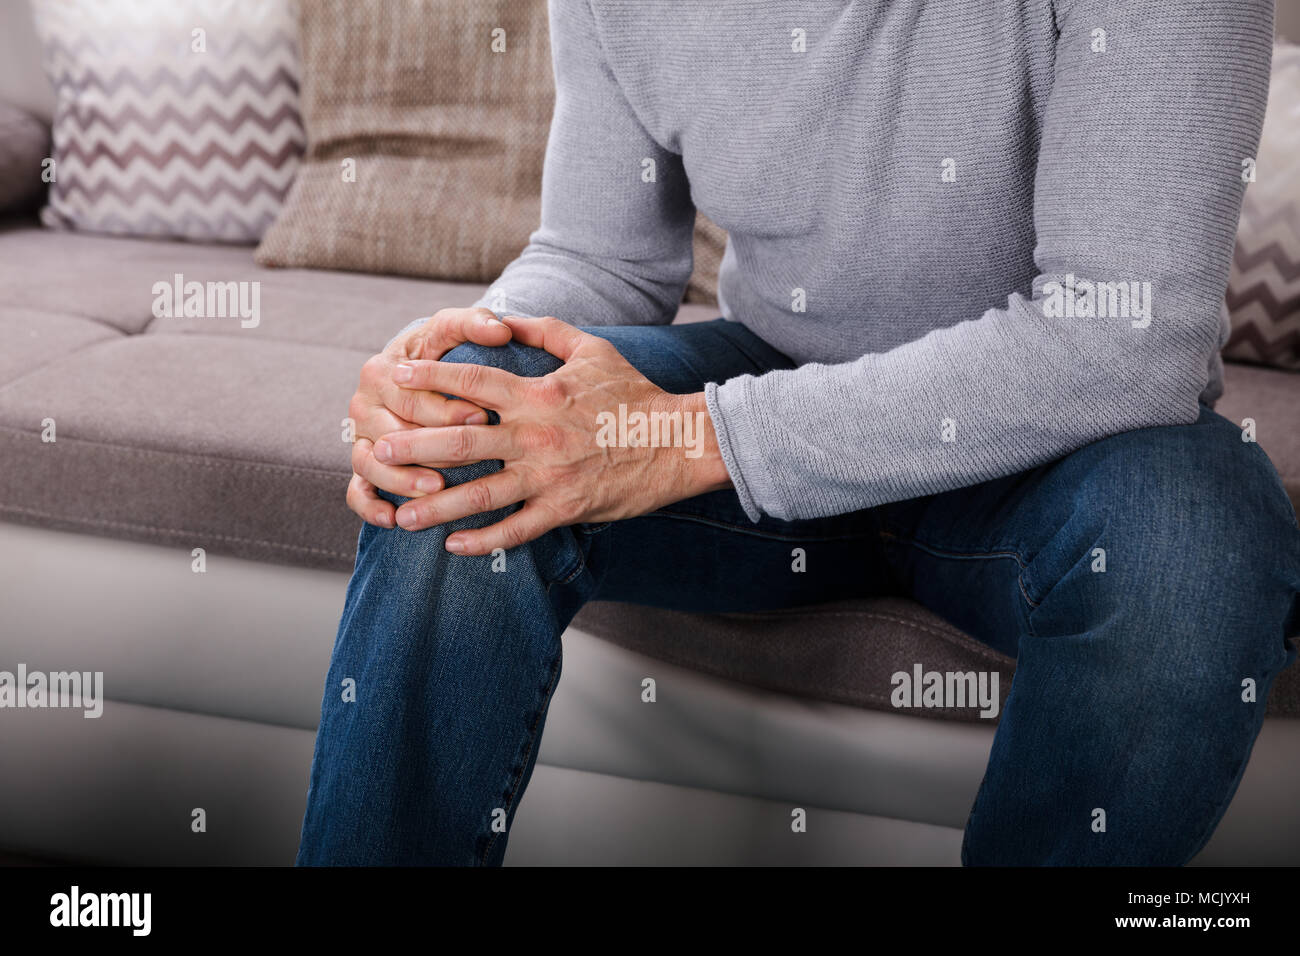 Man Suffering From Knee Pain Sitting On Sofa Stock Photo